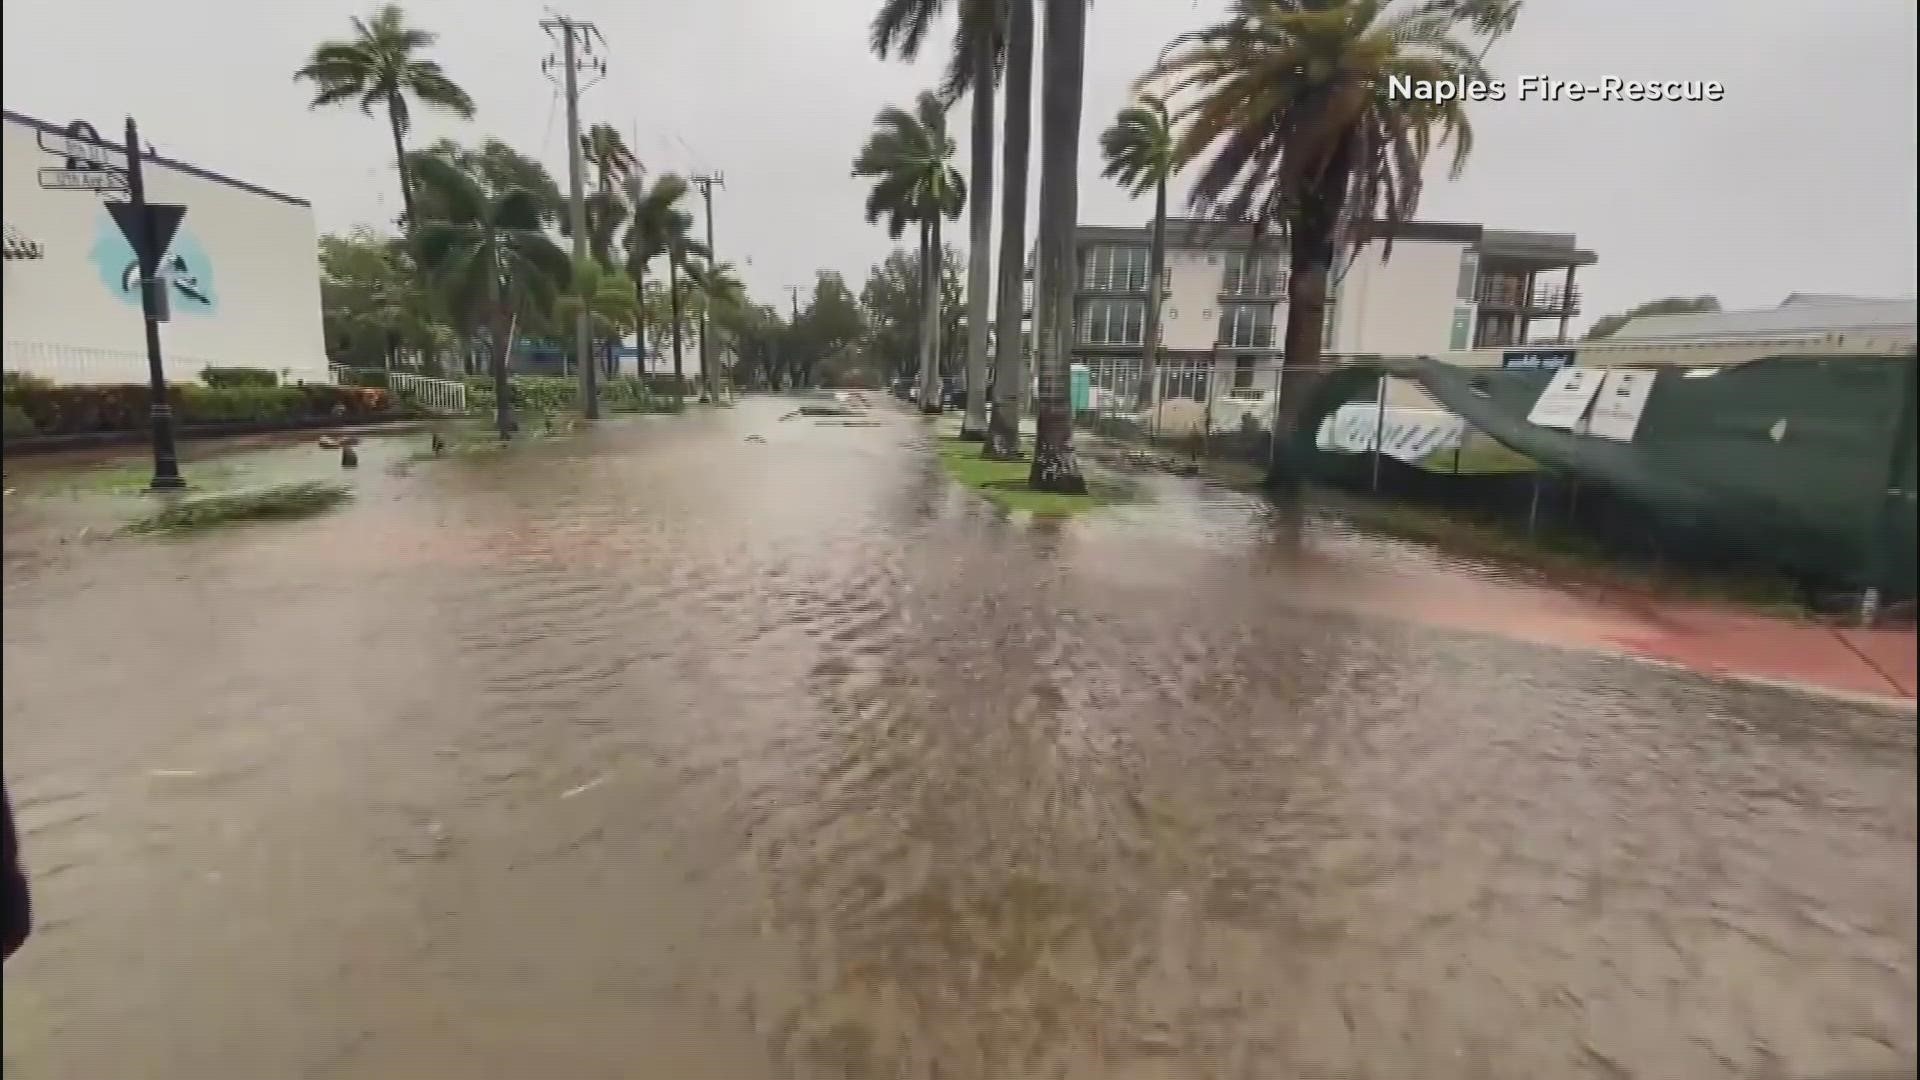 This is a video of flooded streets in Naples, Florida as Hurricane Ian nears landfall. Video credit: Naples Fire-Rescue